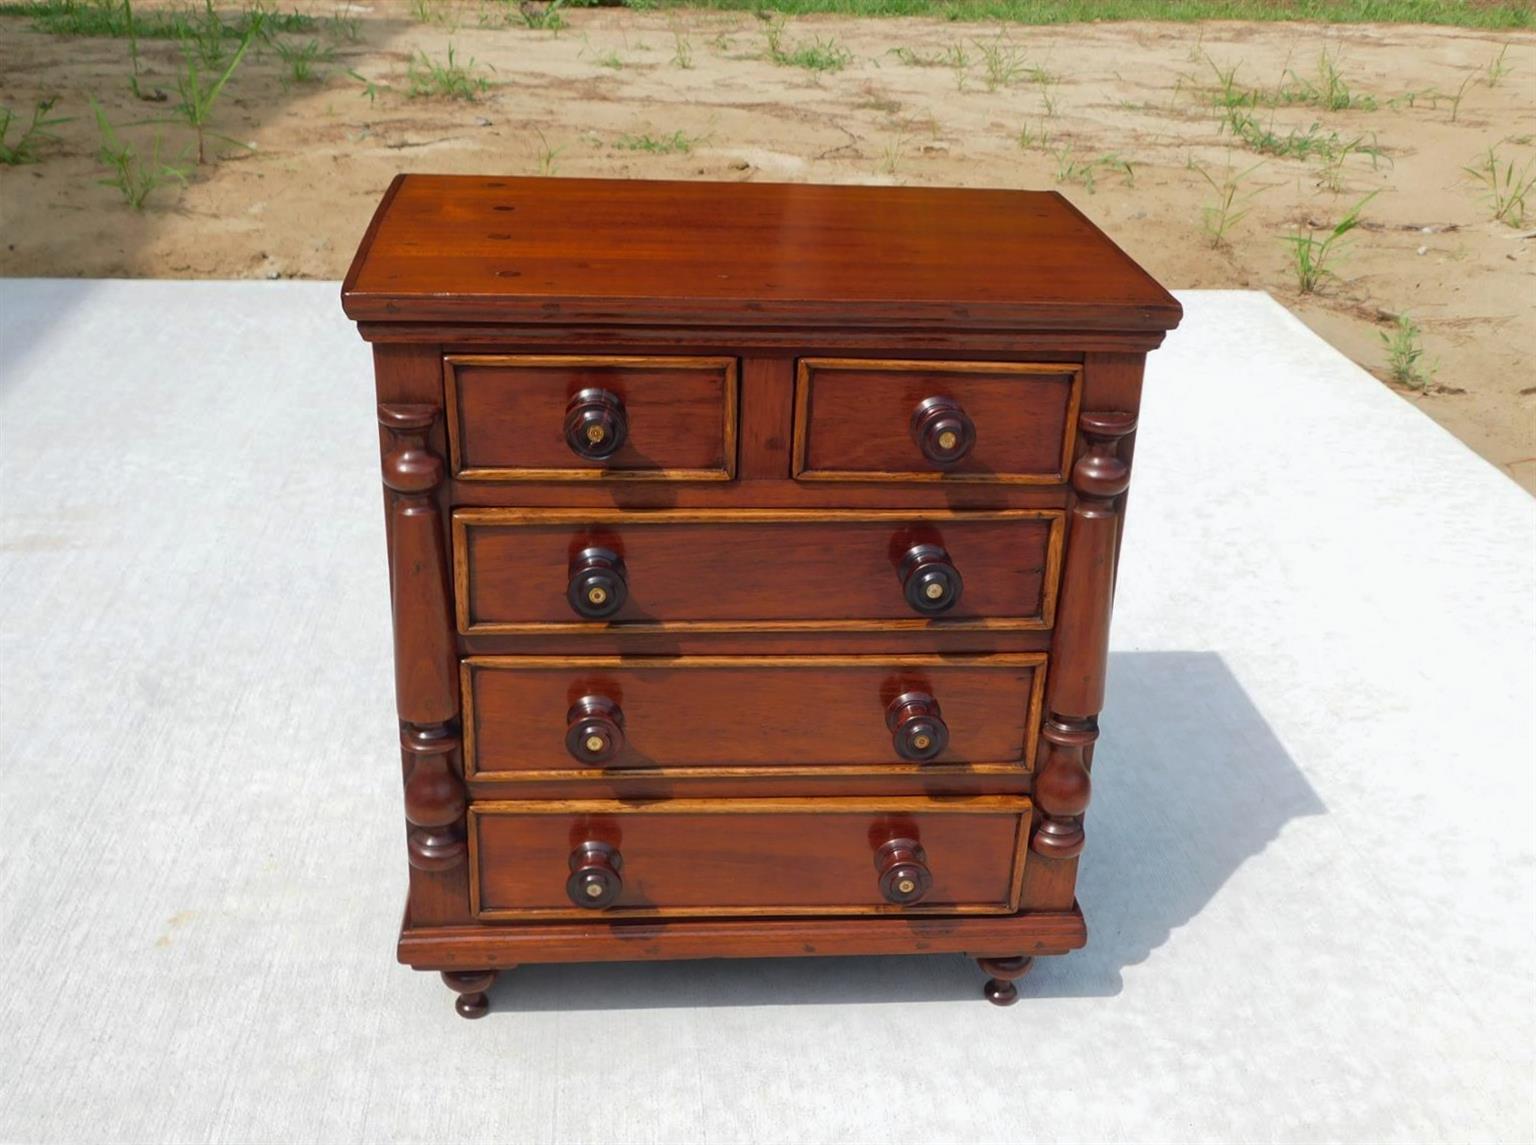 American Sheraton Mahogany five drawer miniature chest with a carved molded edge top, flanking turned bulbous half columns, turned wooden knobs with central mother of pearl inlays, and resting on a molded edge skirt with the original finial bun